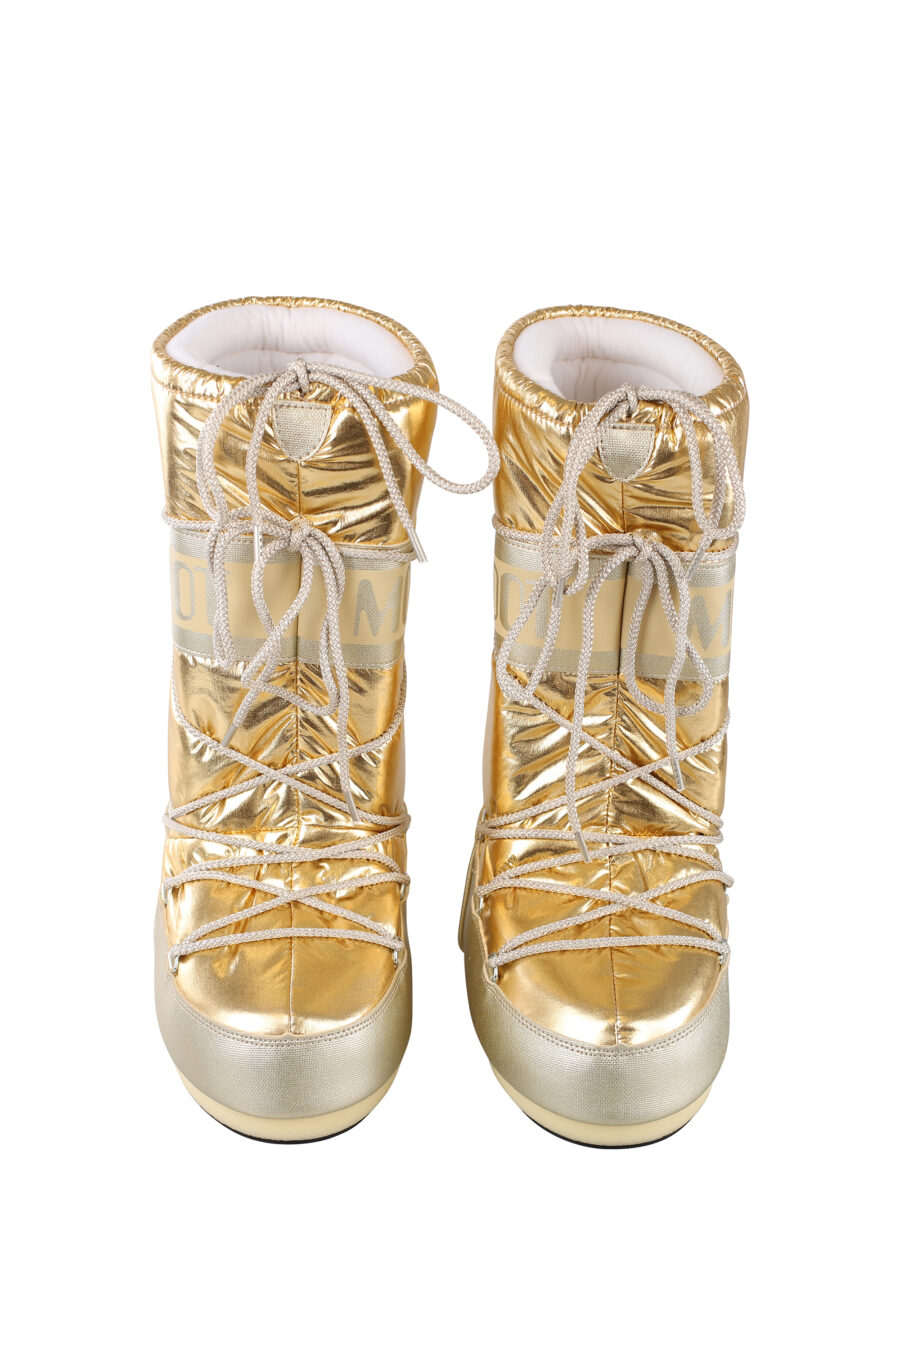 Gold shiny snow boots with gold logo - IMG 6711